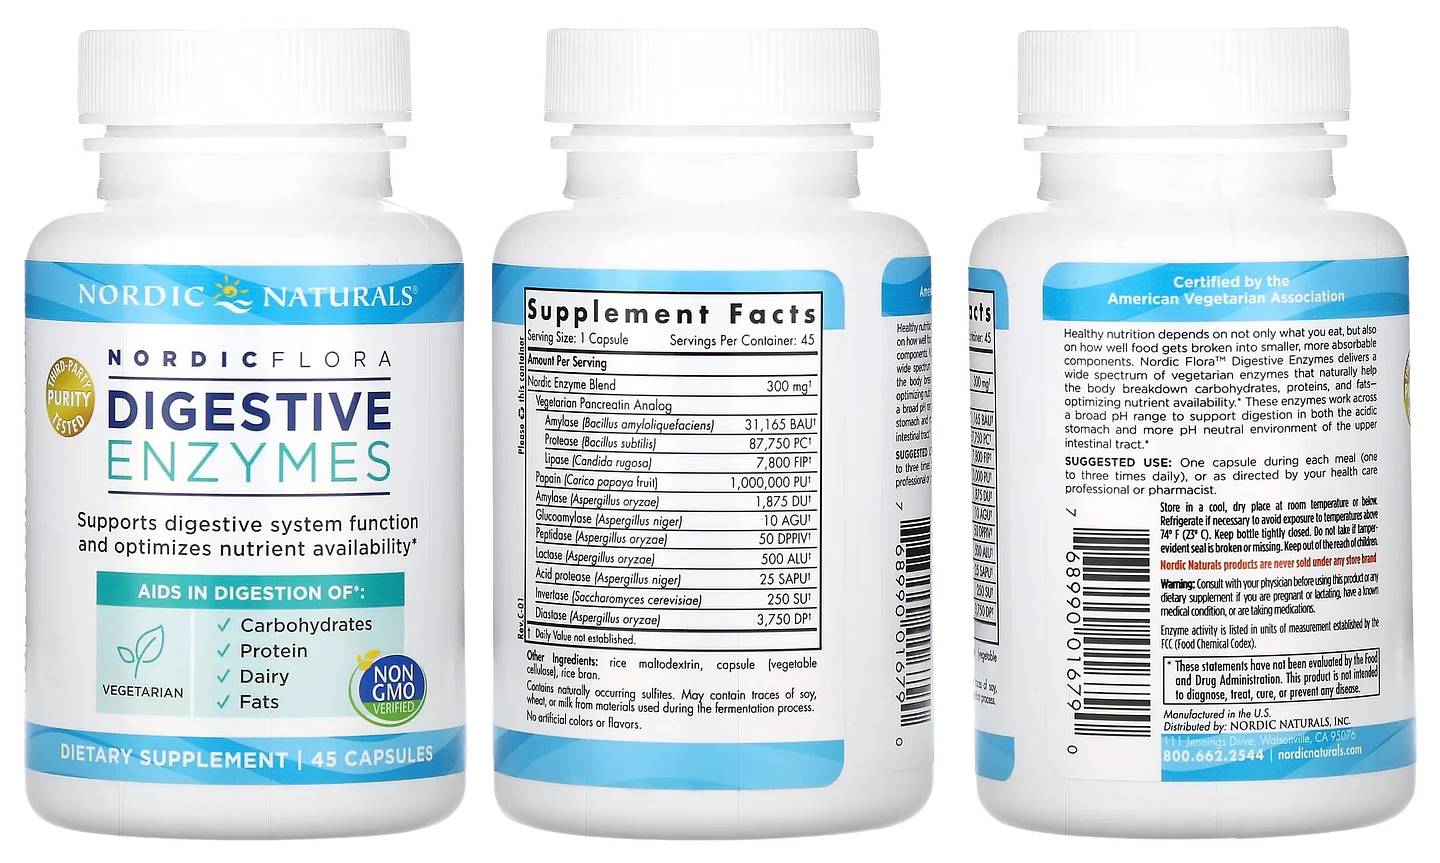 Nordic Naturals, Nordic Flora Digestive Enzymes packaging